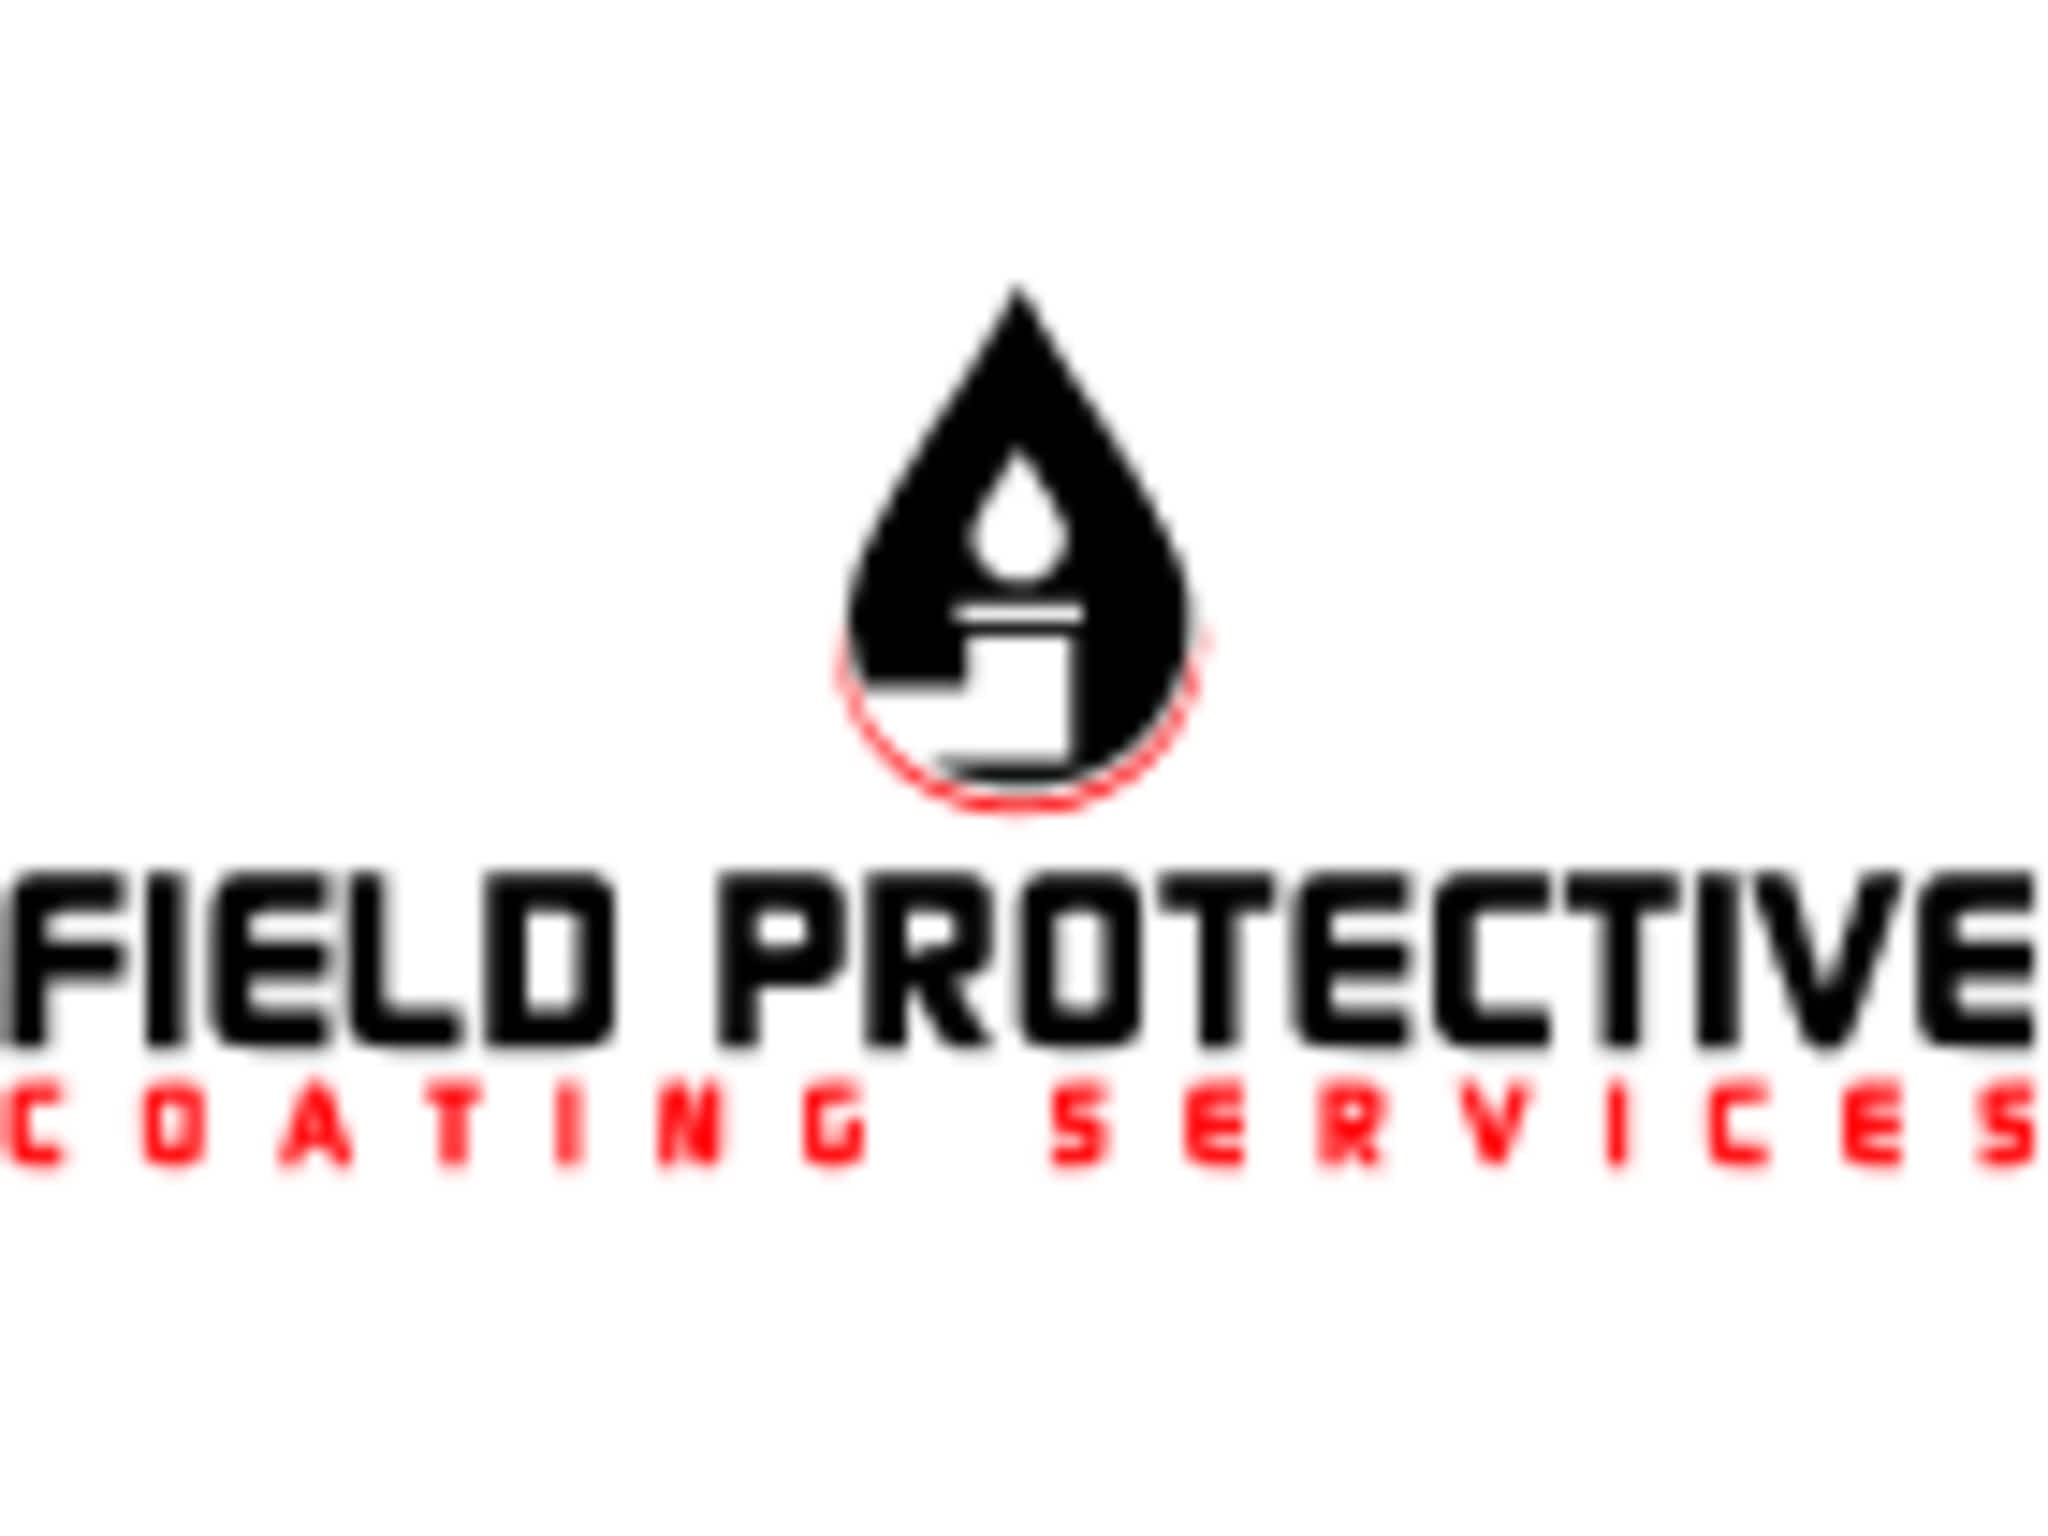 photo Field Protective Coating Services